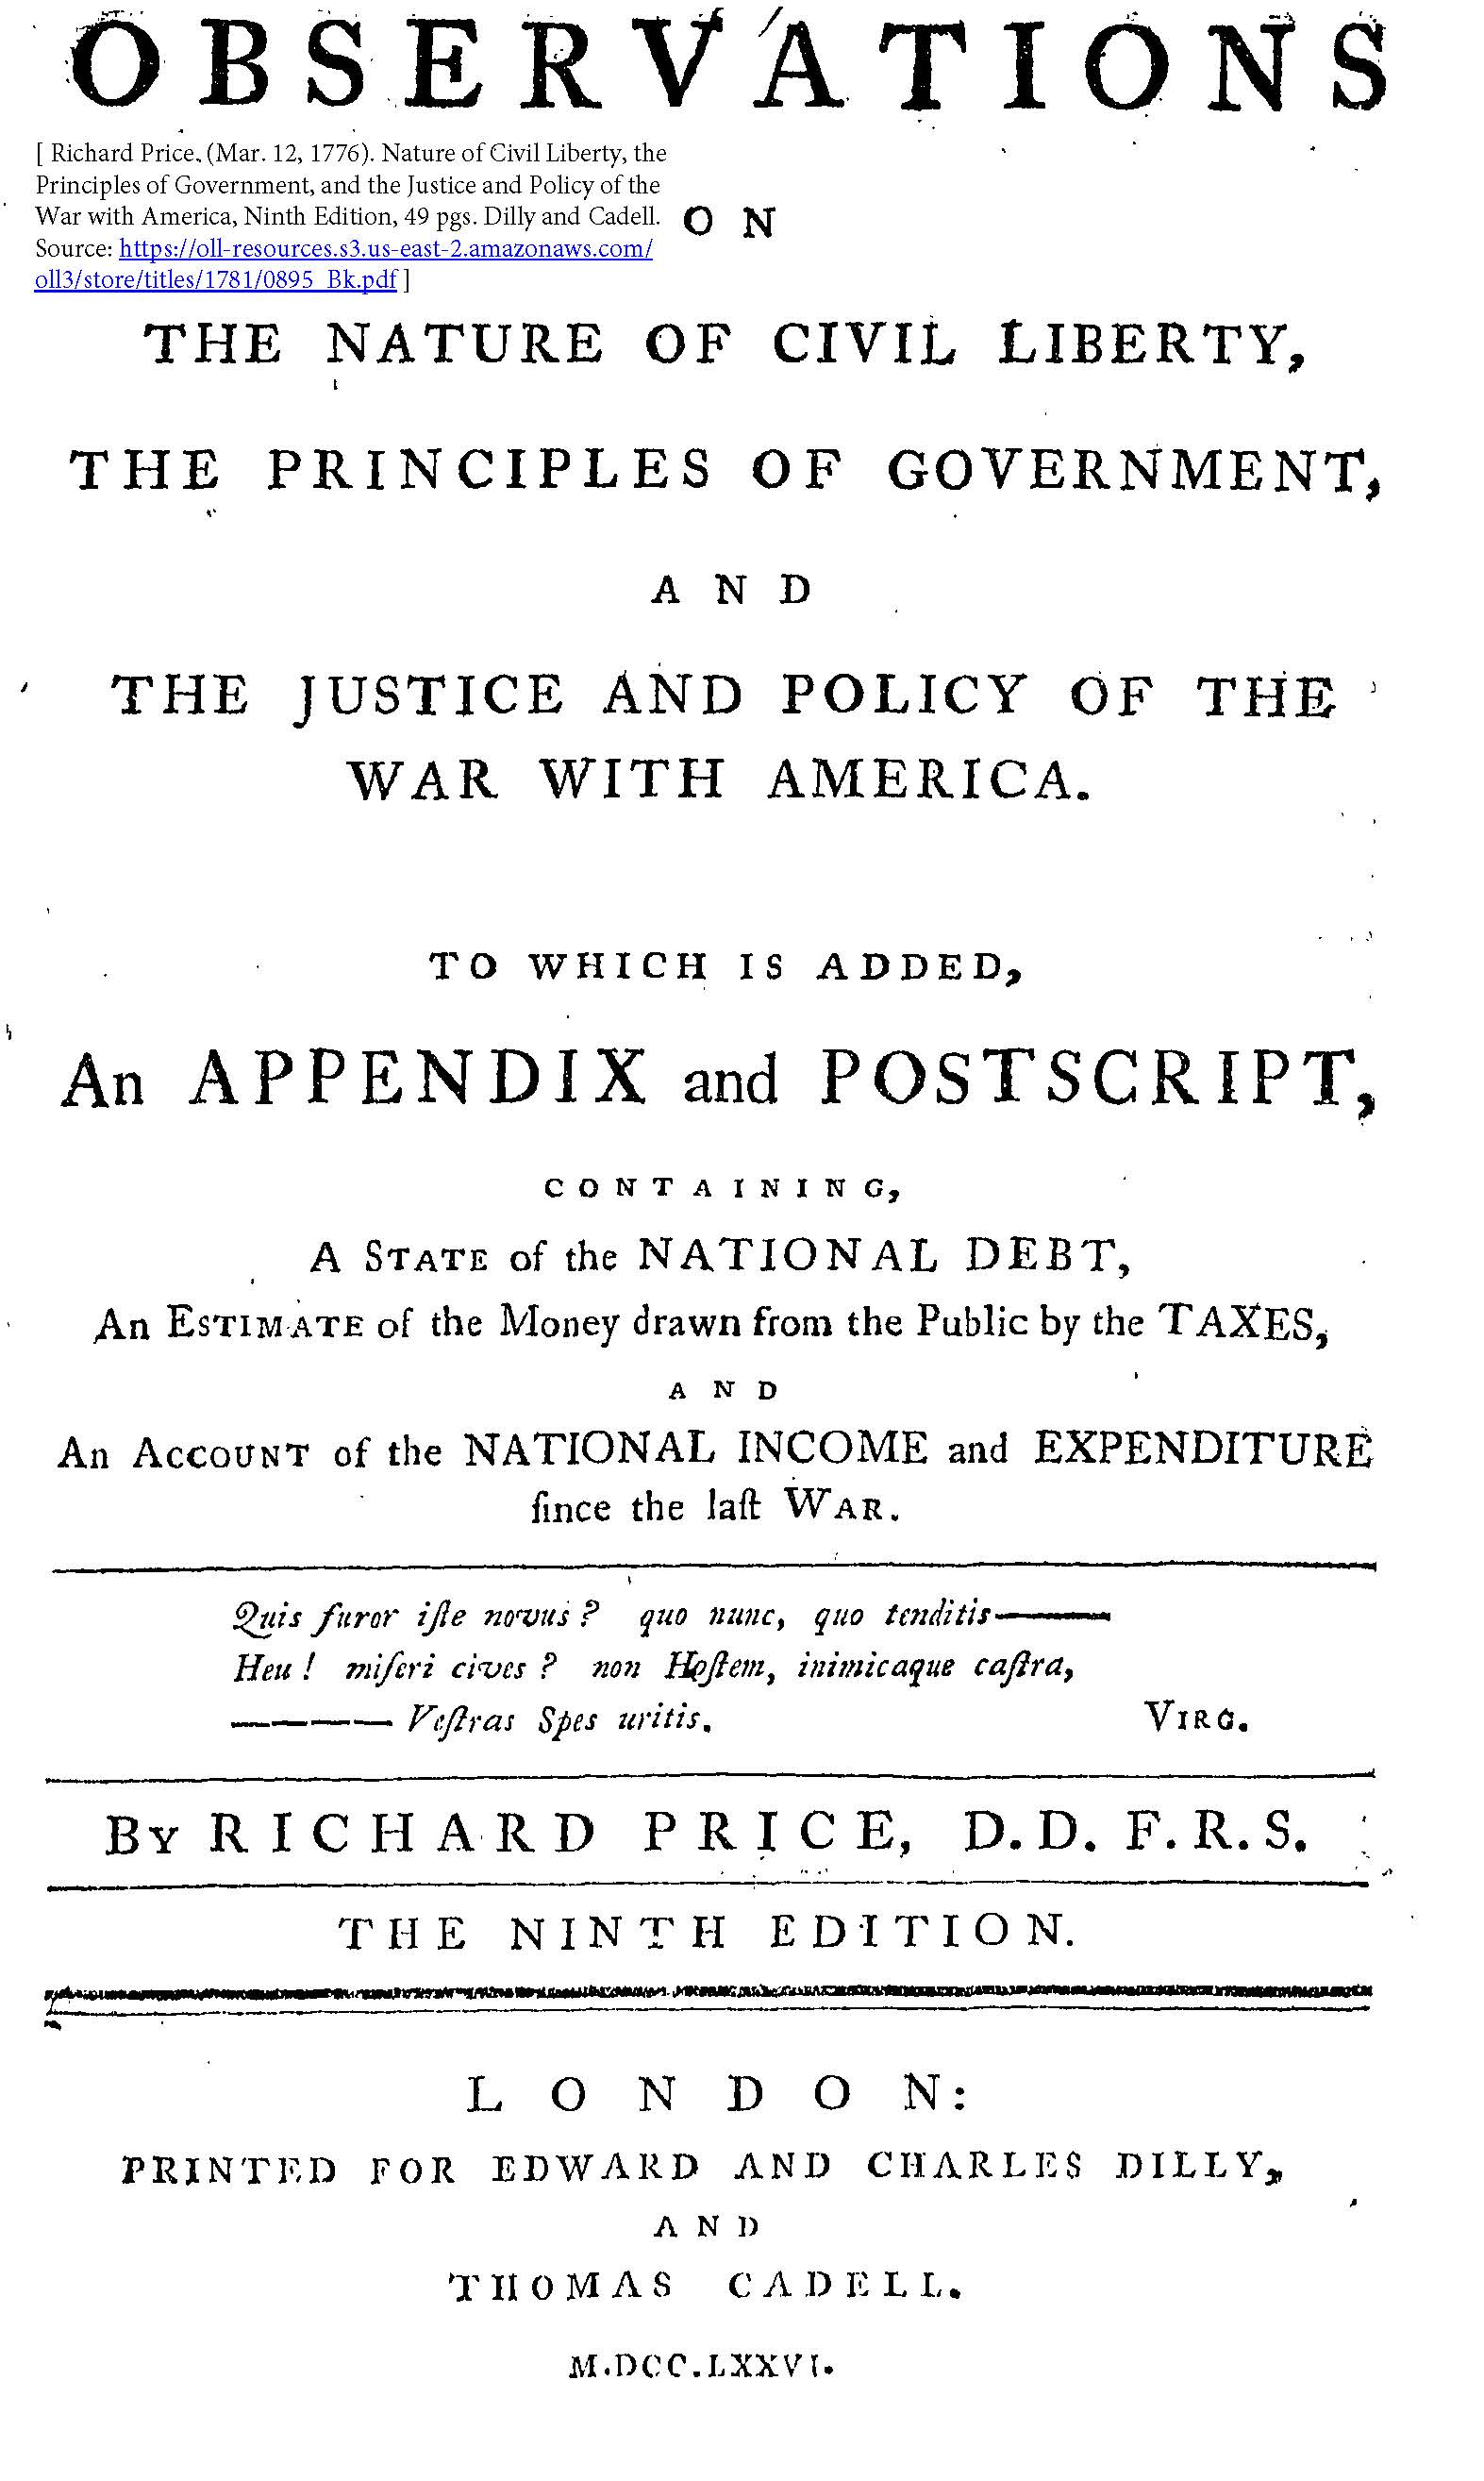 Richard Price. (Mar. 12, 1776). Nature of Civil Liberty, the Principles of Government, and the Justice and Policy of the War with America, Ninth Edition, 49 pgs. Dilly and Cadell.